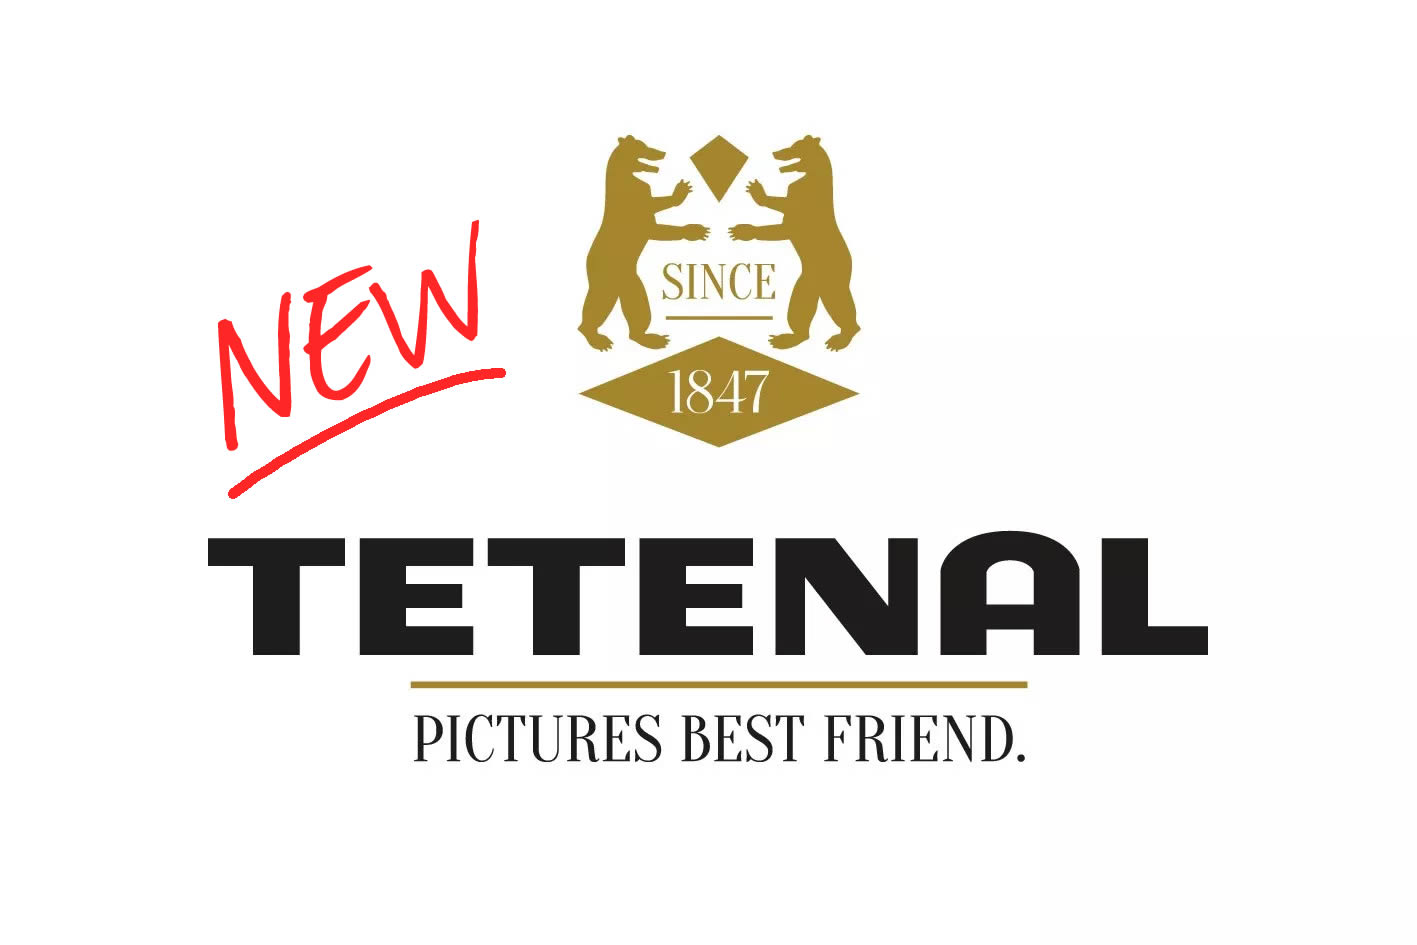 UPDATED: NEW TETENAL taking over operations and production from insolvent parent company